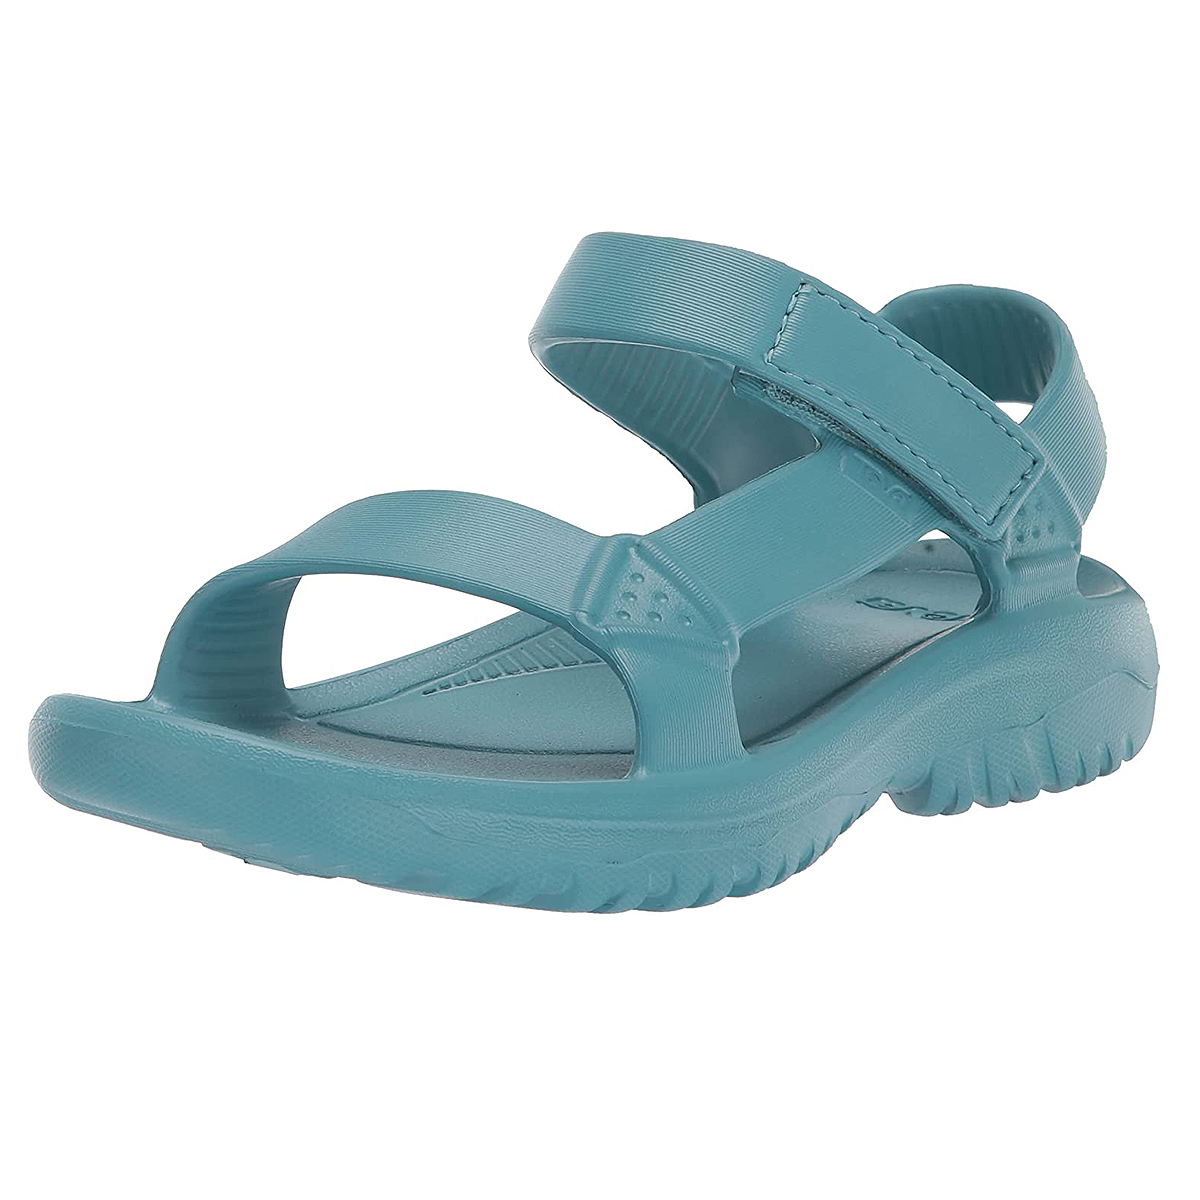 Travel Sandals for Your Next Trip: 10 Comfy Picks | Us Weekly